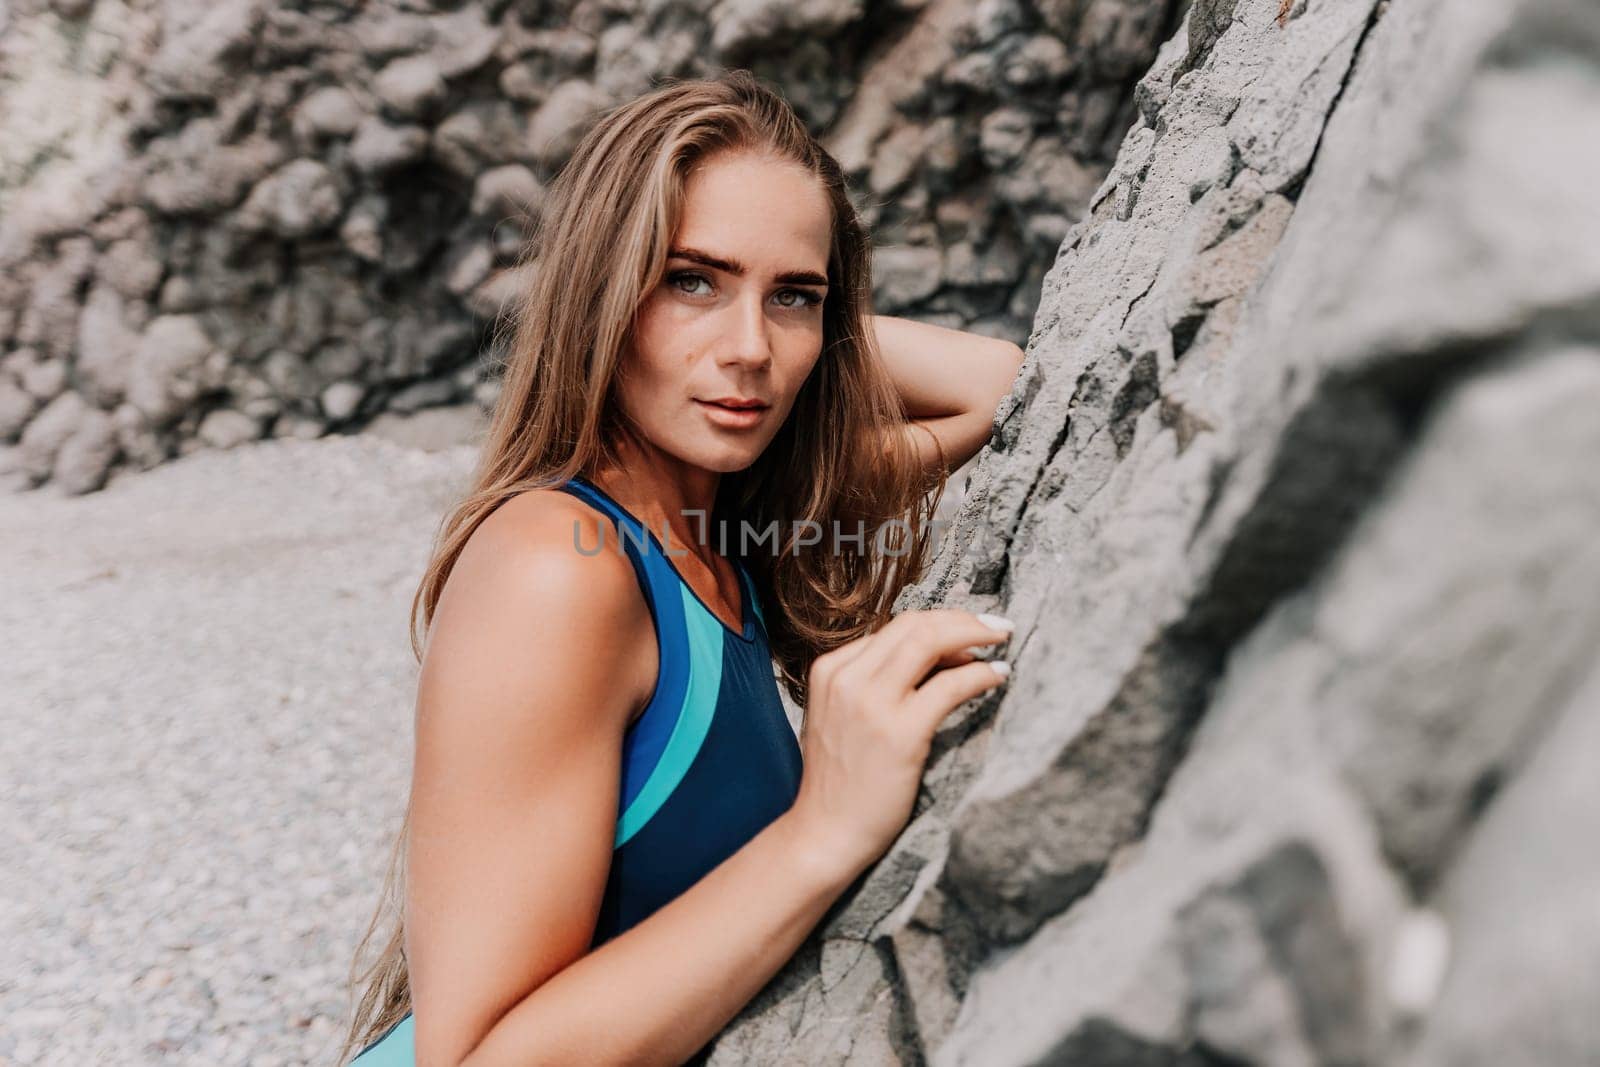 Woman summer travel sea. Happy tourist in blue bikini enjoy taking picture outdoors for memories. Woman traveler posing on the beach surrounded by volcanic mountains, sharing travel adventure journey by panophotograph